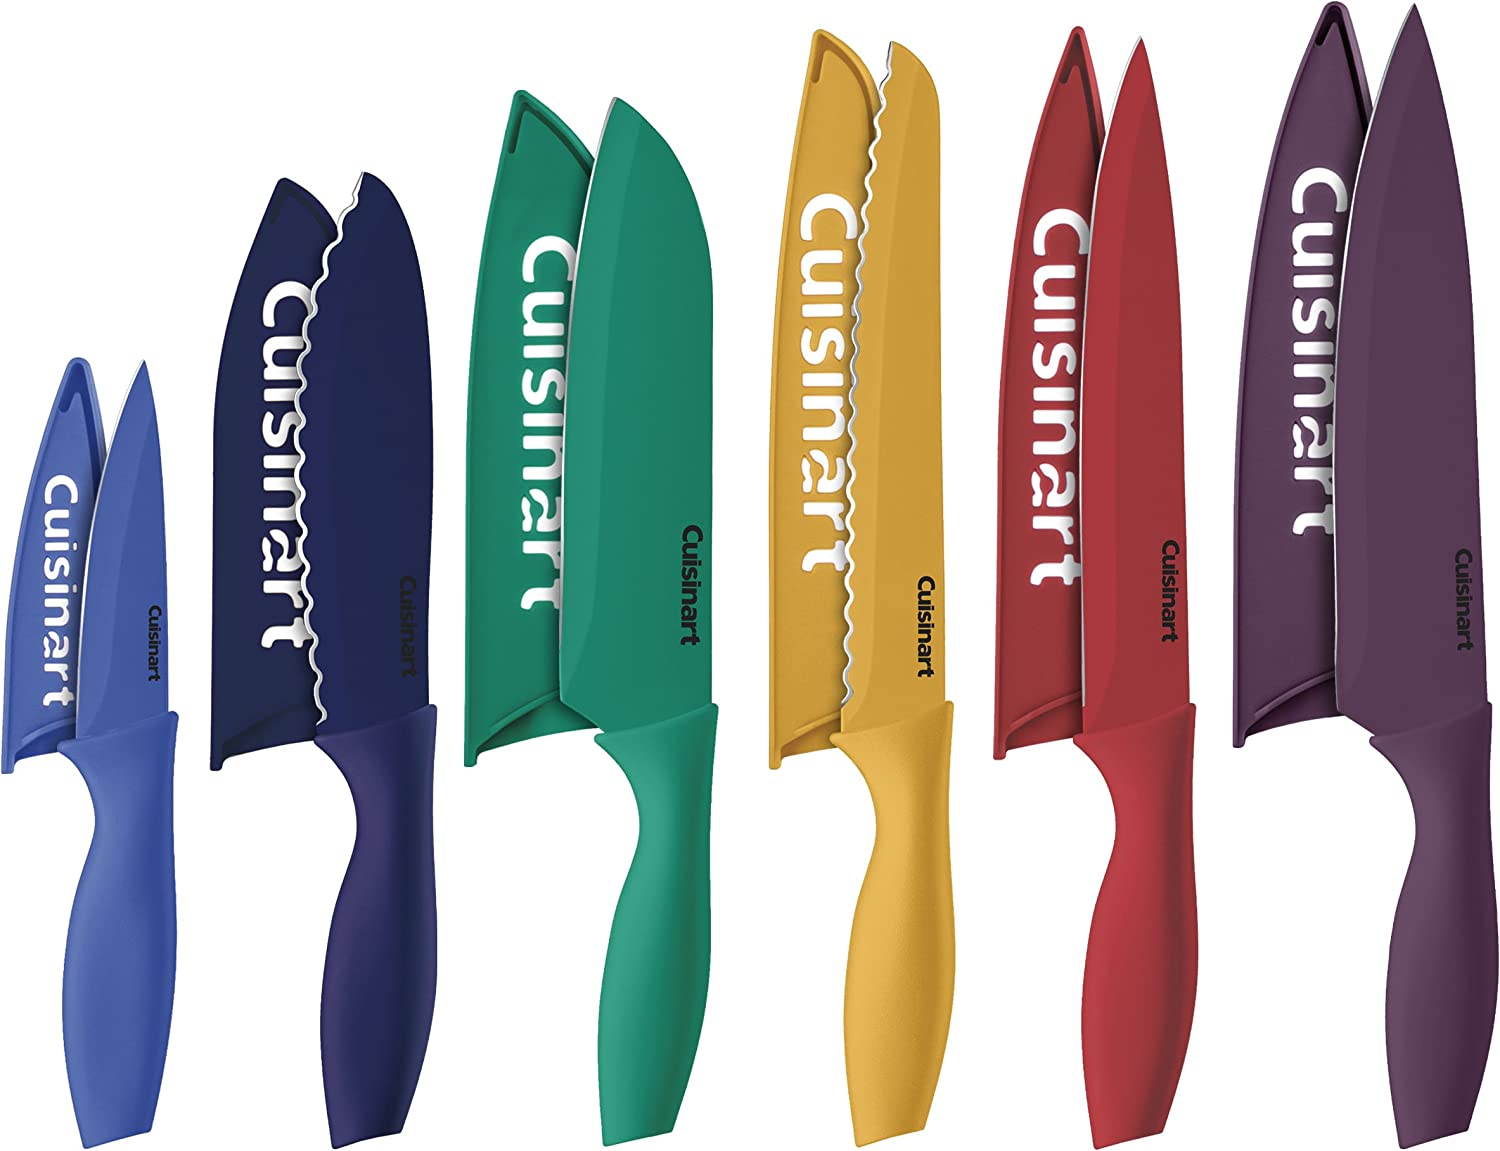 Cuisinart C55-12PCKSAM 12-Piece Ceramic Coated Stainless Steel Knives